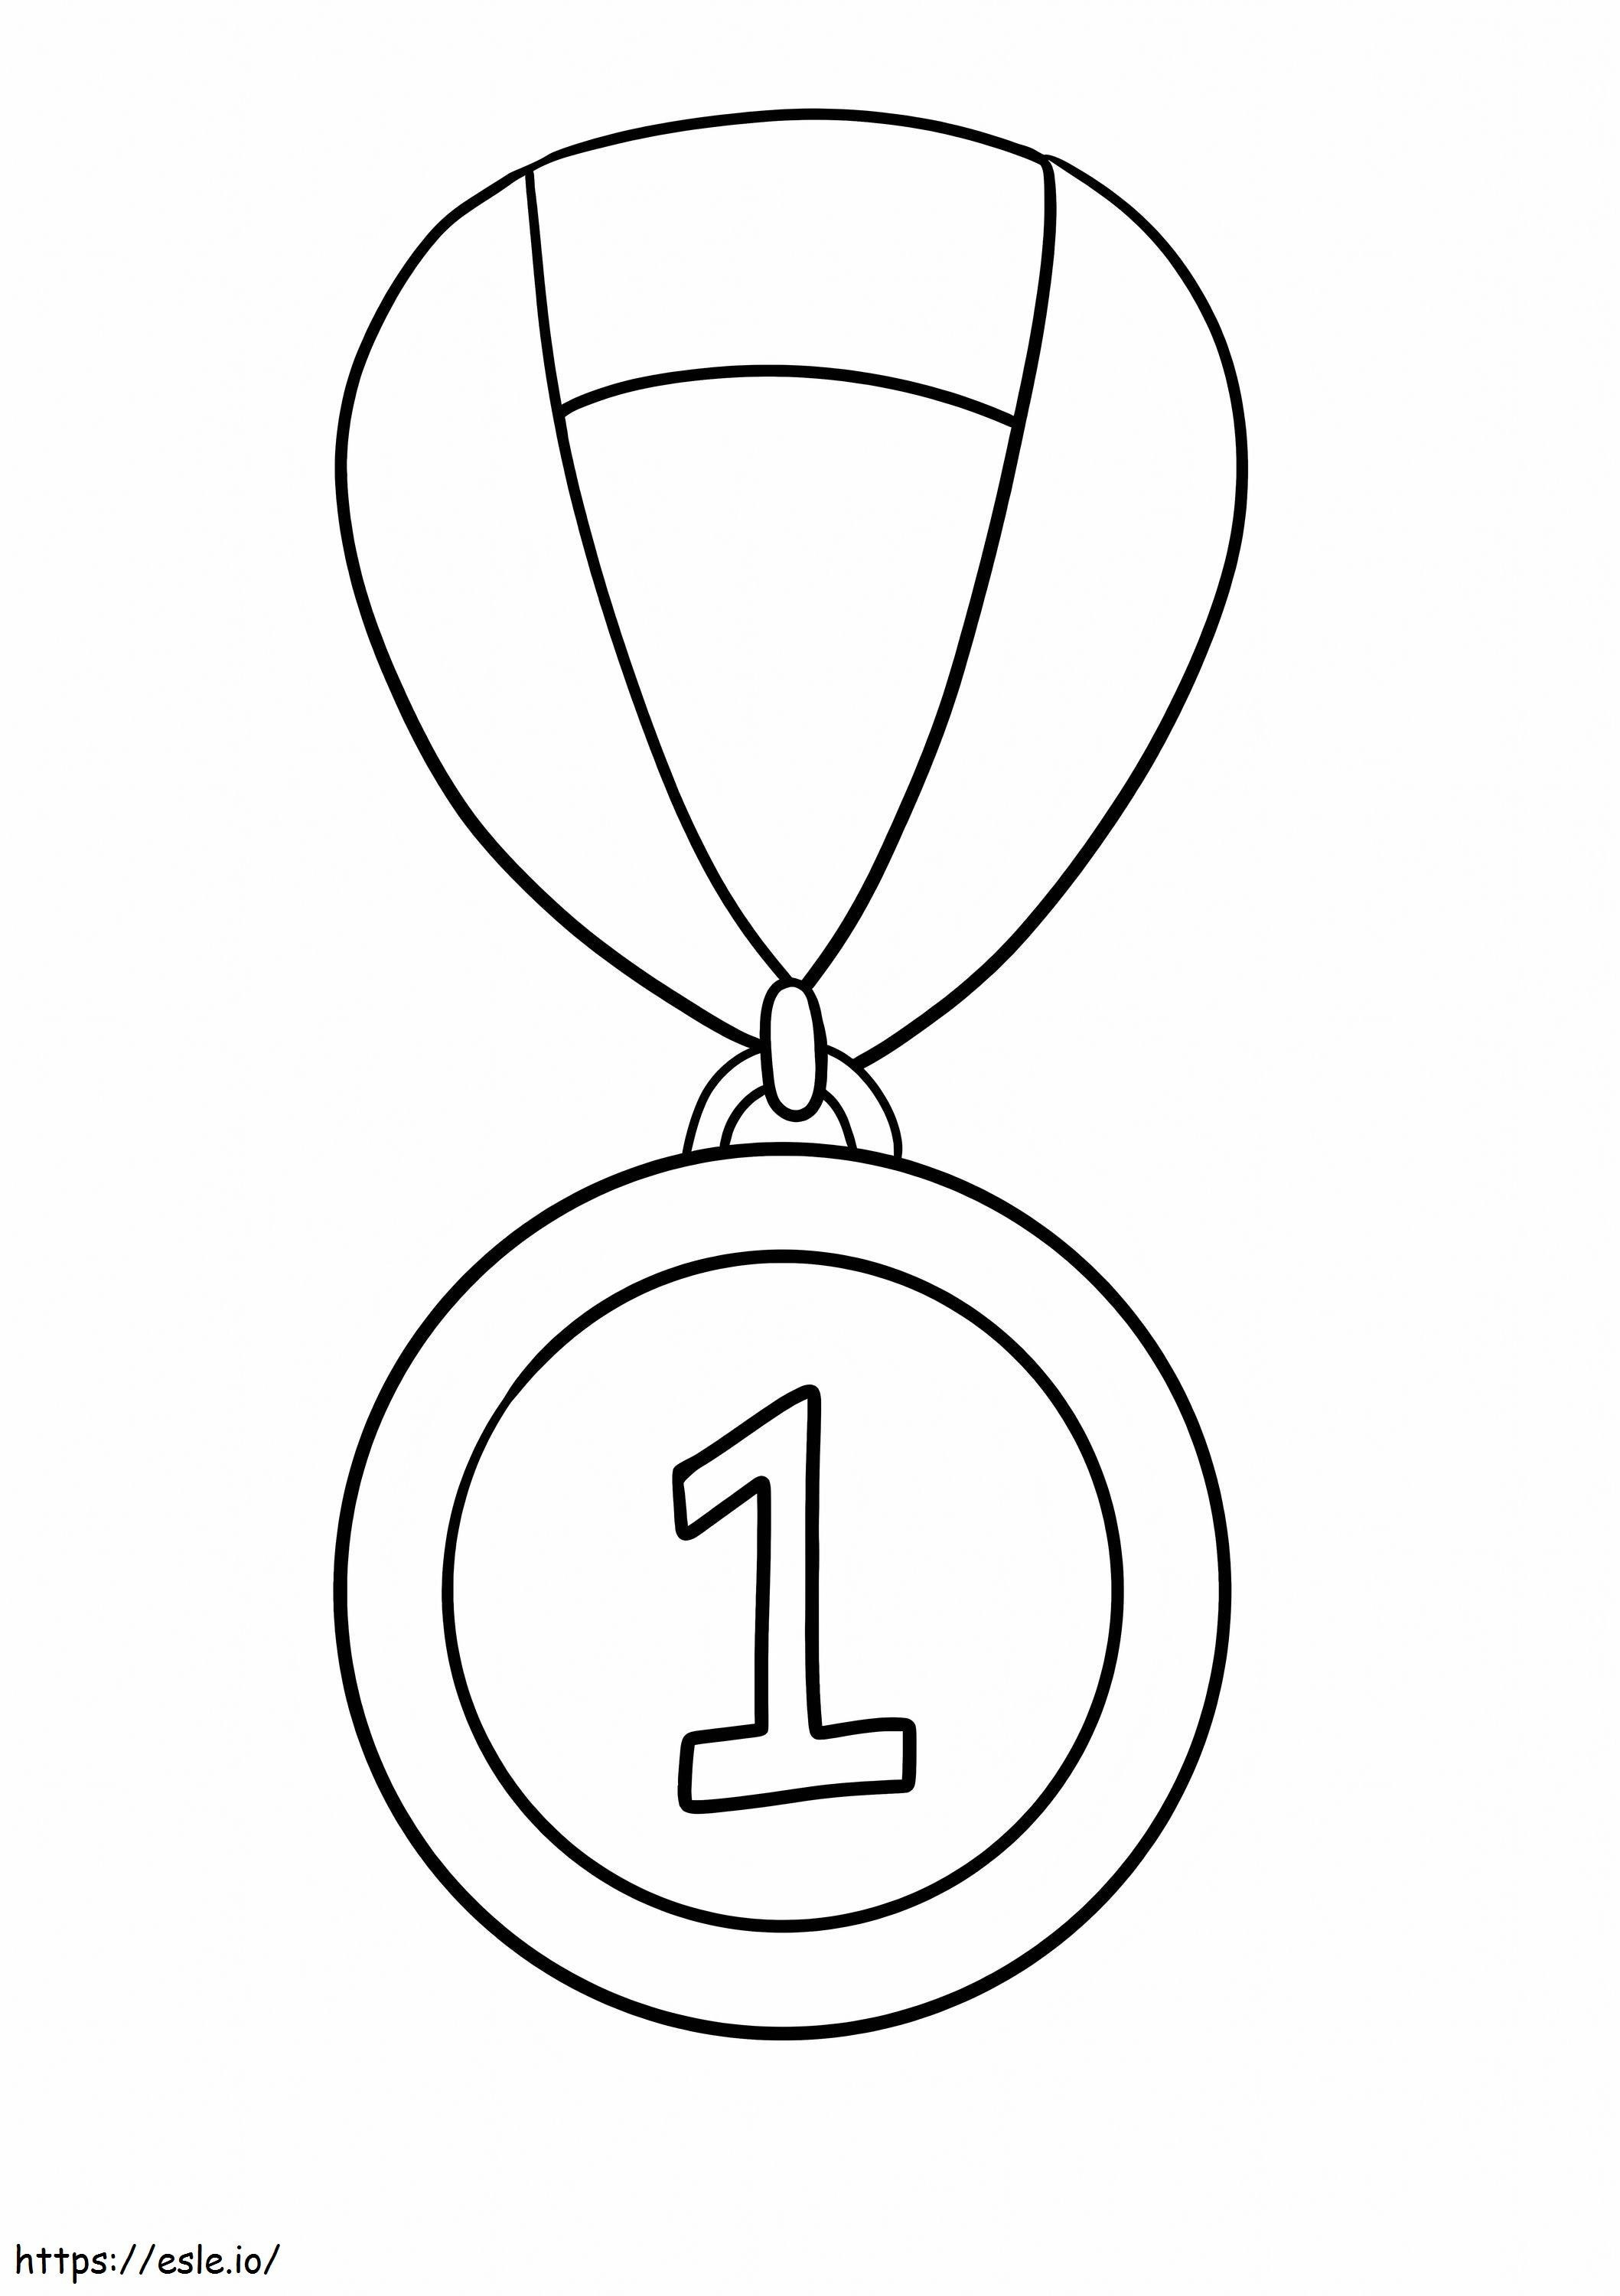 Medal Number 1 coloring page